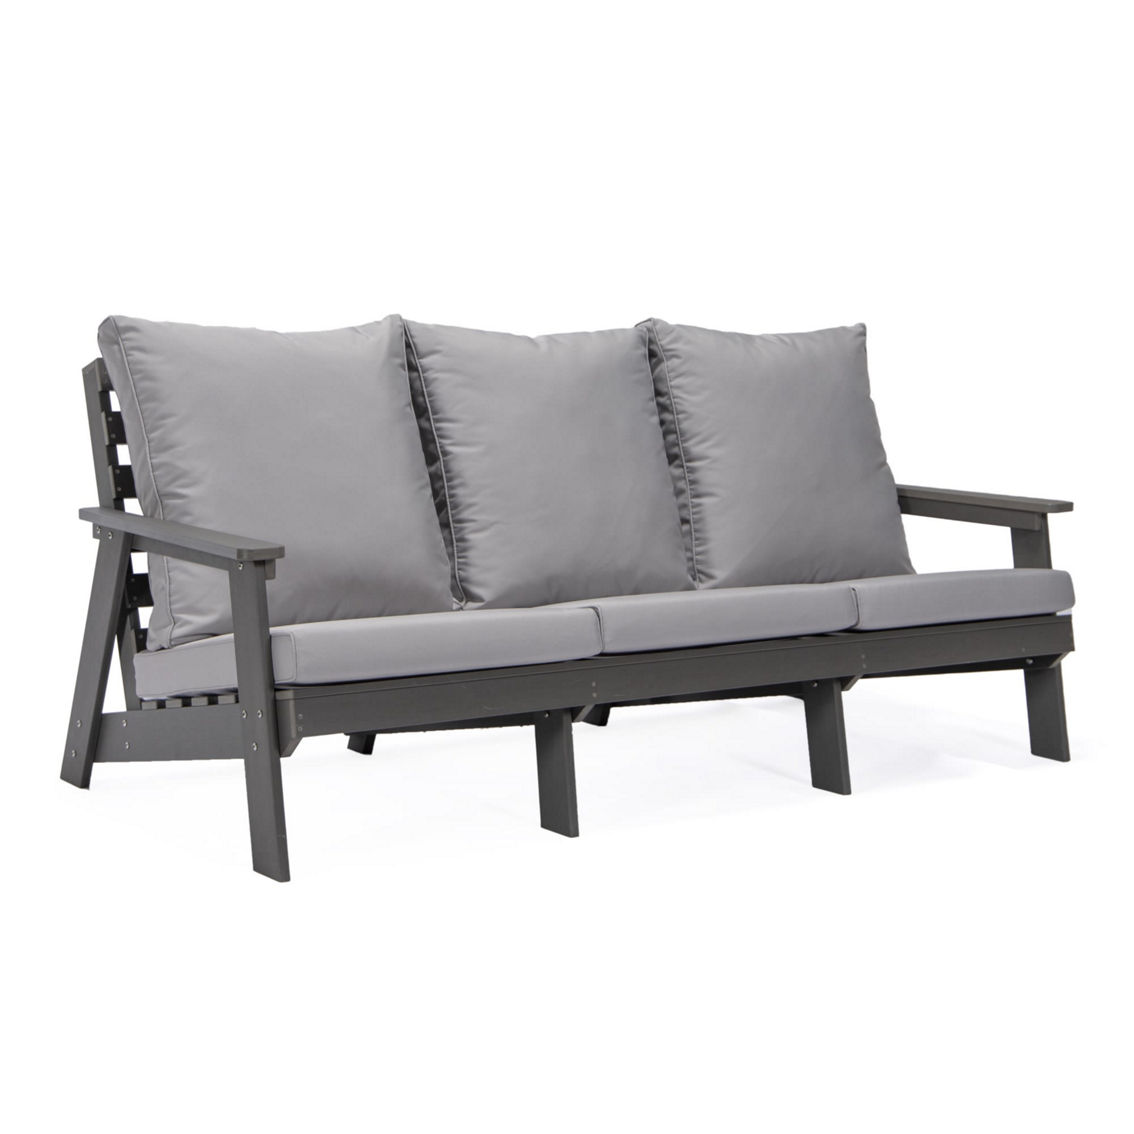 Inspired Home Hiba Outdoor 4pc Seating Group - Image 4 of 5